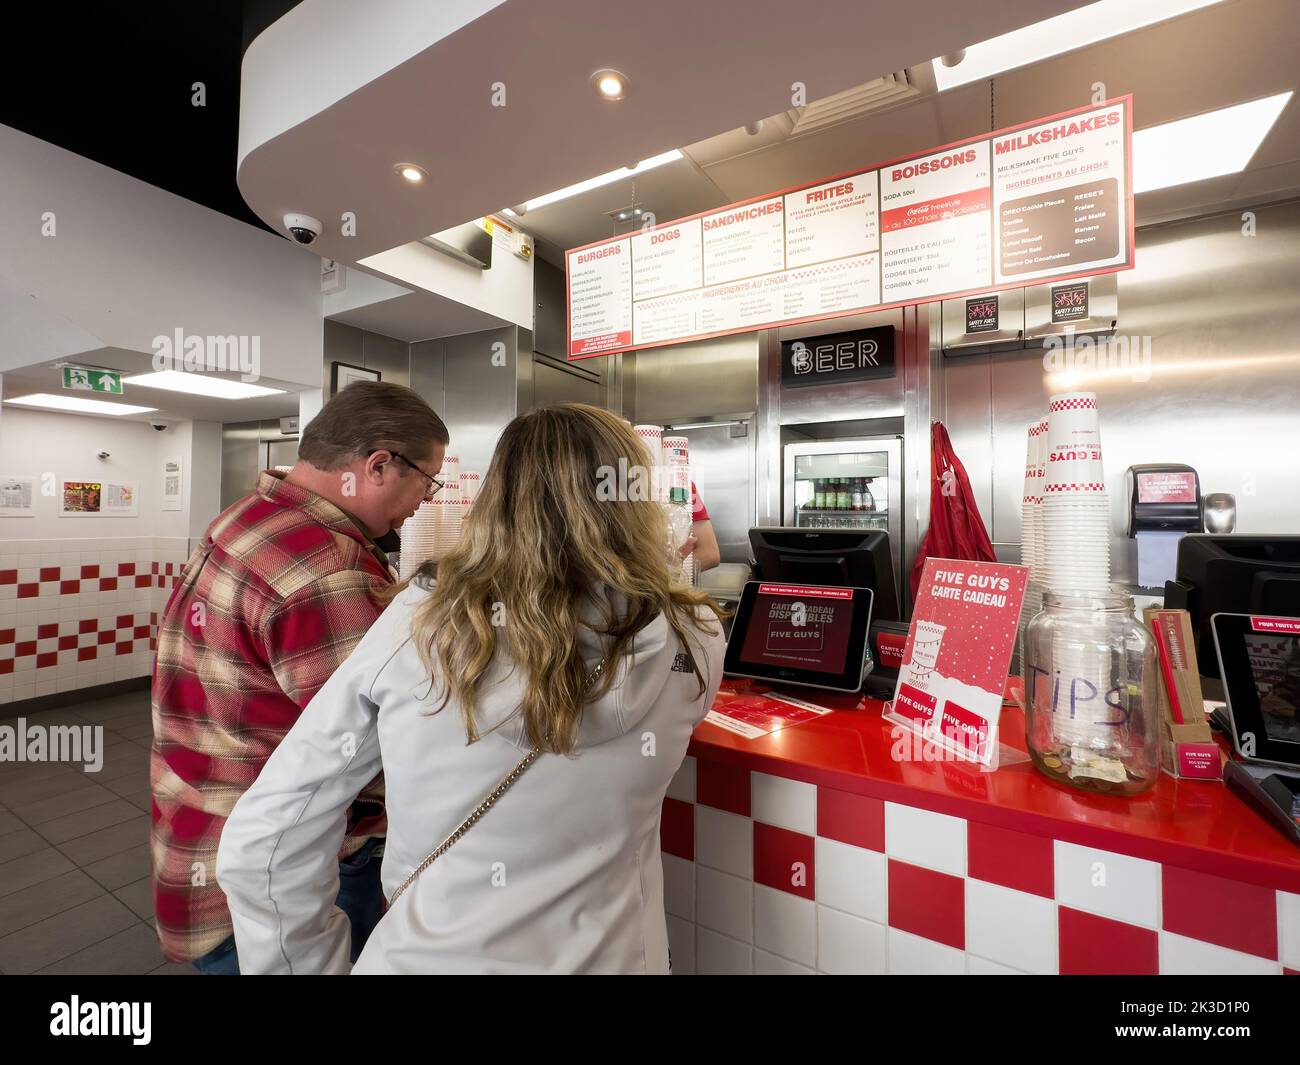 Paris, France - Sep 21, 2022: Customers at the counter reading the menu above Five Guys American fast food restaurant chain with focused on hamburgers, hot dogs, and French fries, and headquartered in Lorton, Virginia, part of Fairfax County. Stock Photo